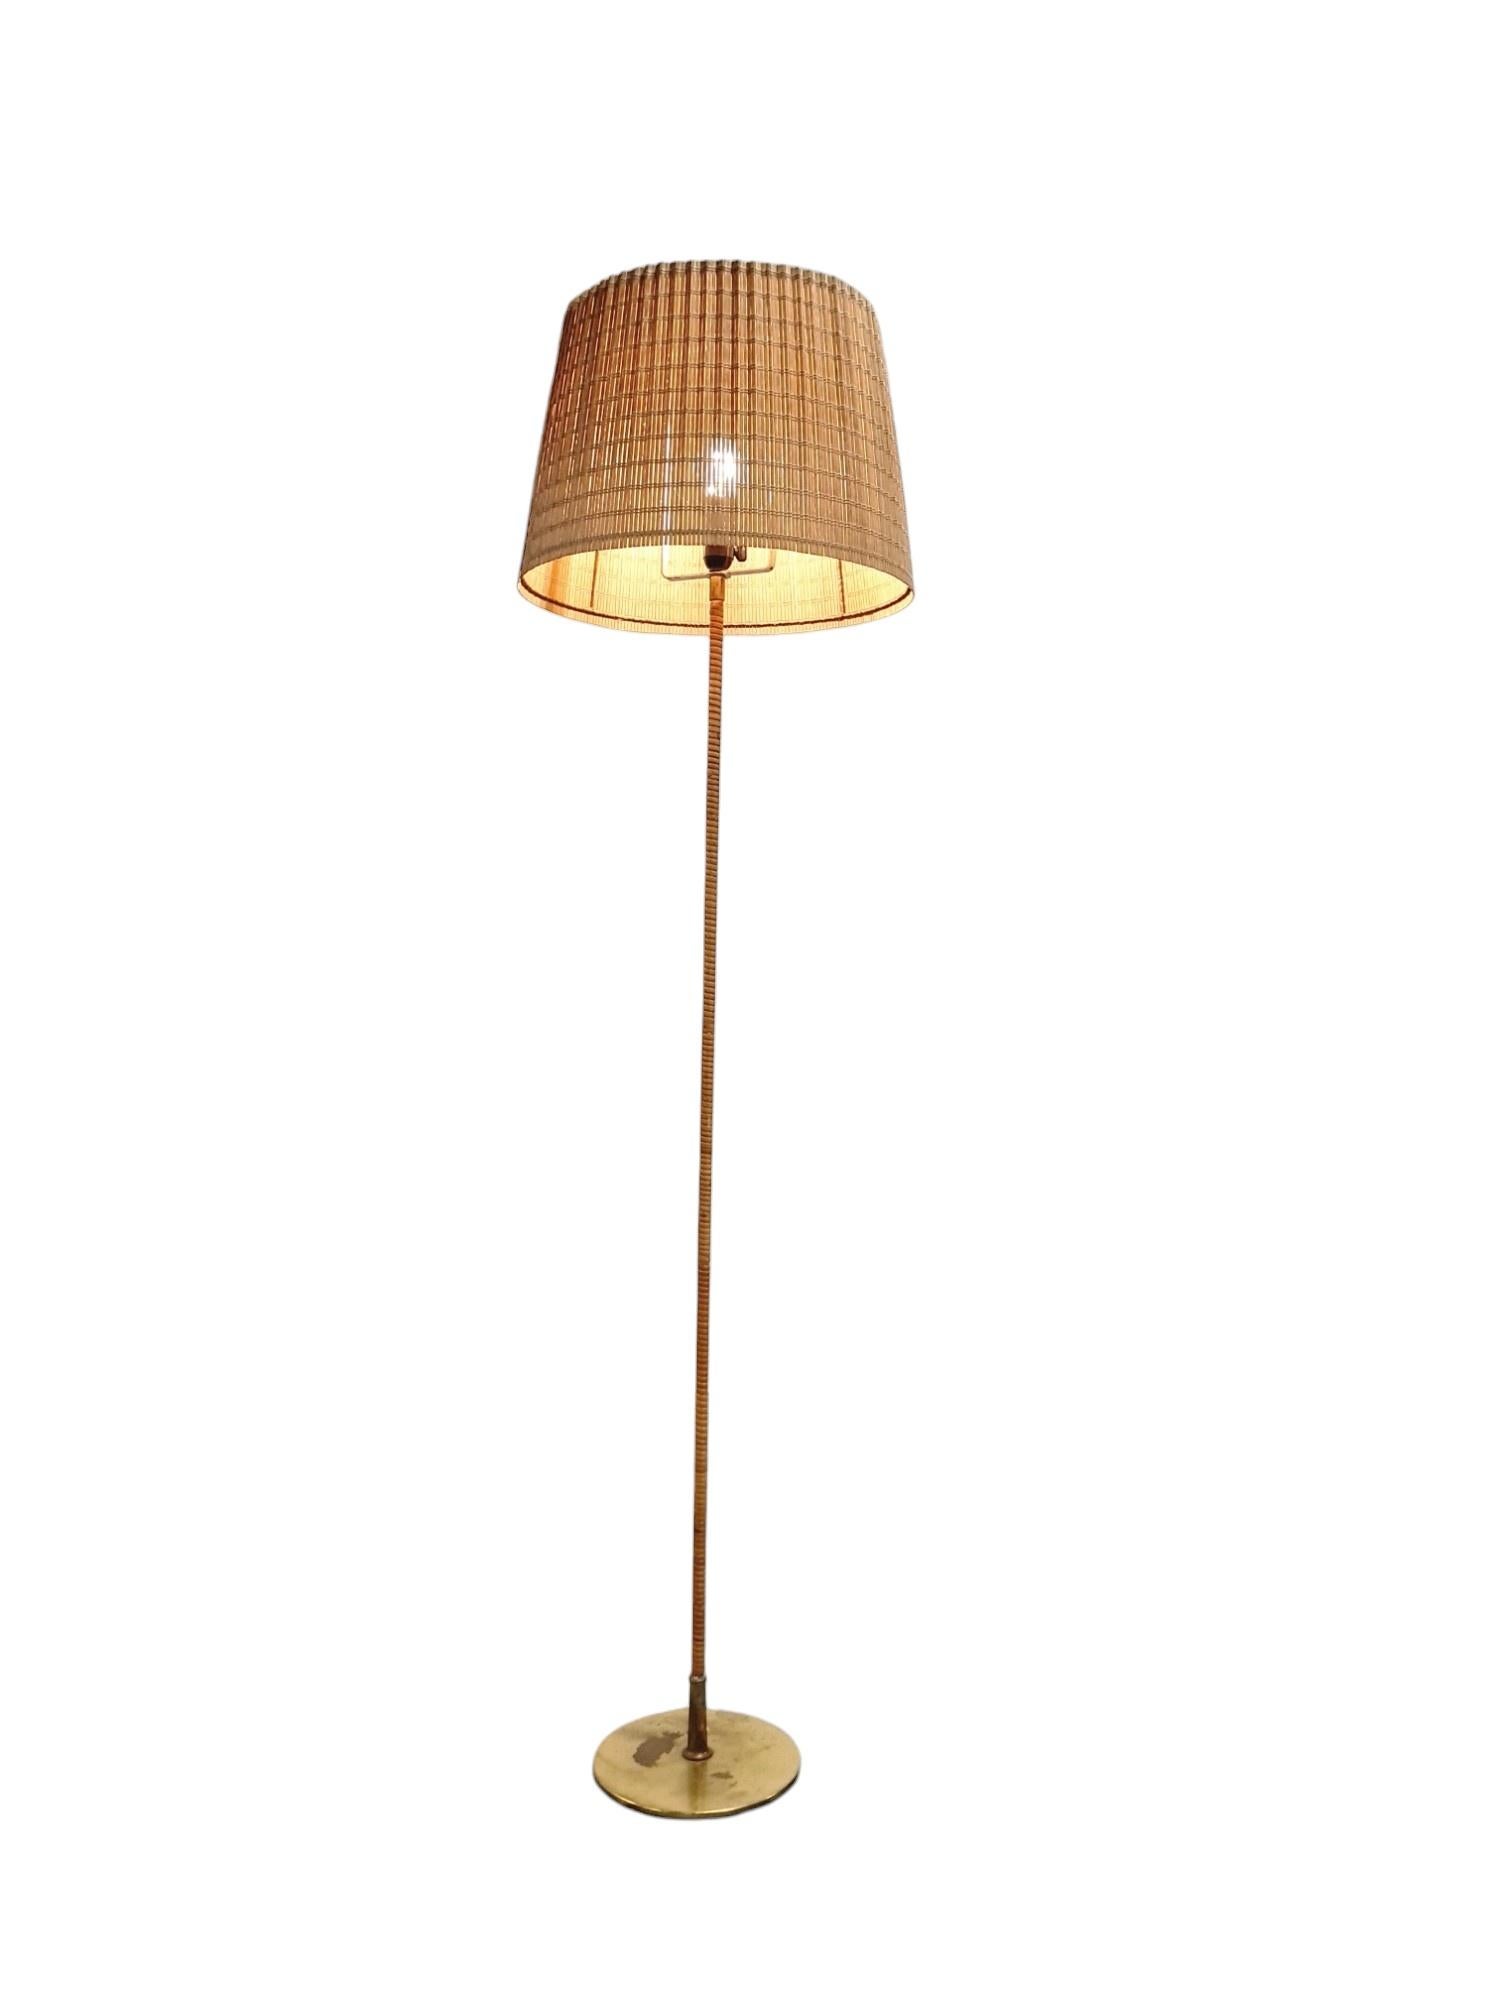 Finnish Paavo Tynell Floor Lamp Model 9627, Taito Oy  For Sale